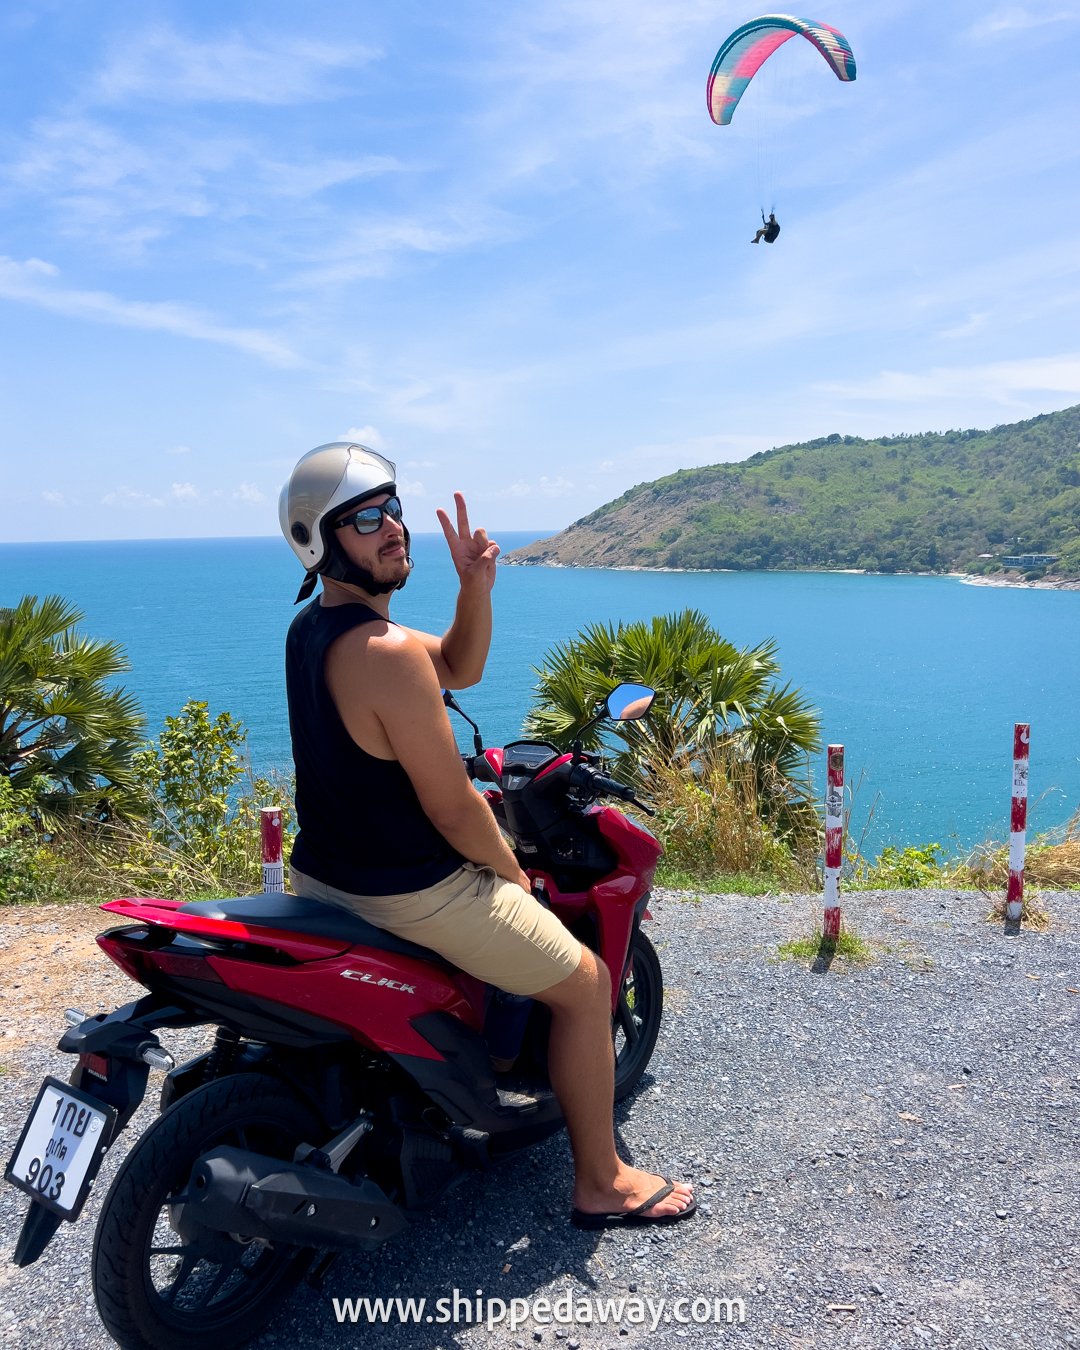 Renting a motorbike scooter in Phuket, Thailand